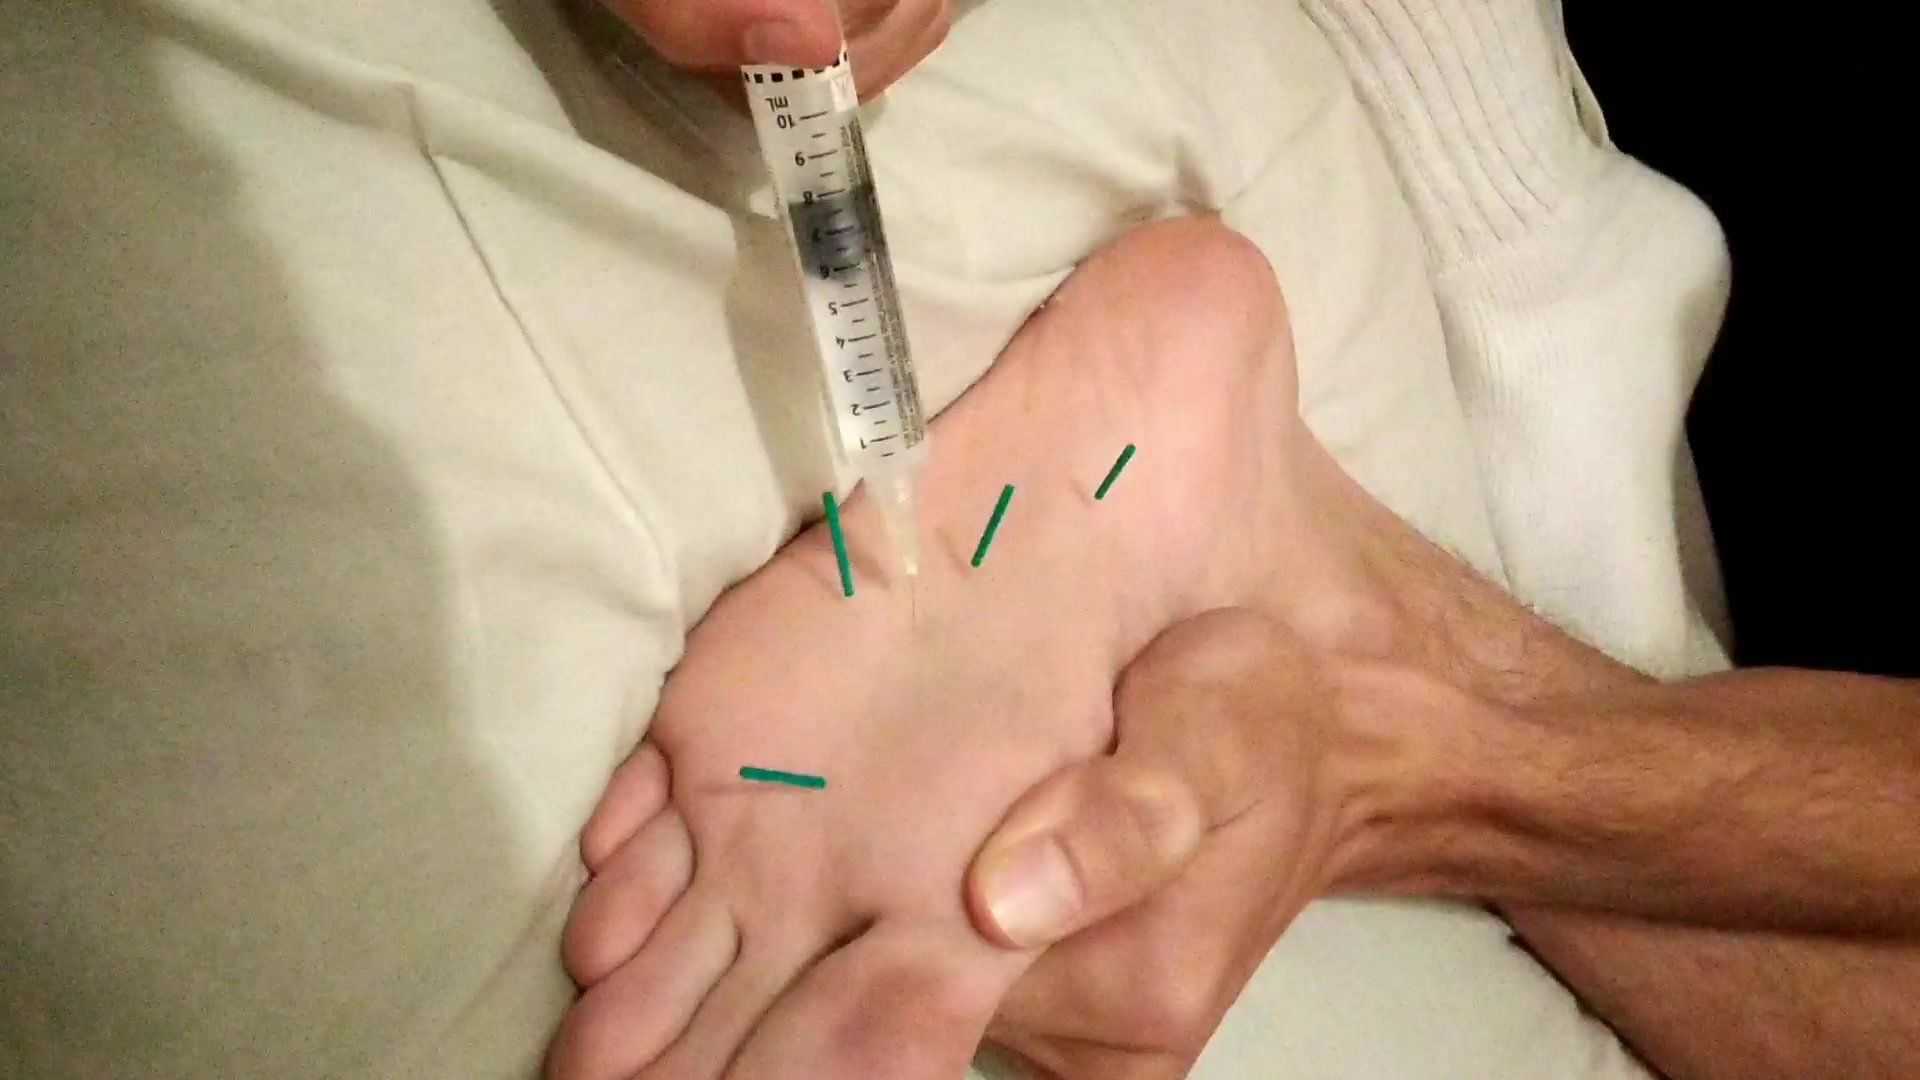 Twink feet acupuncture and injection 1/2